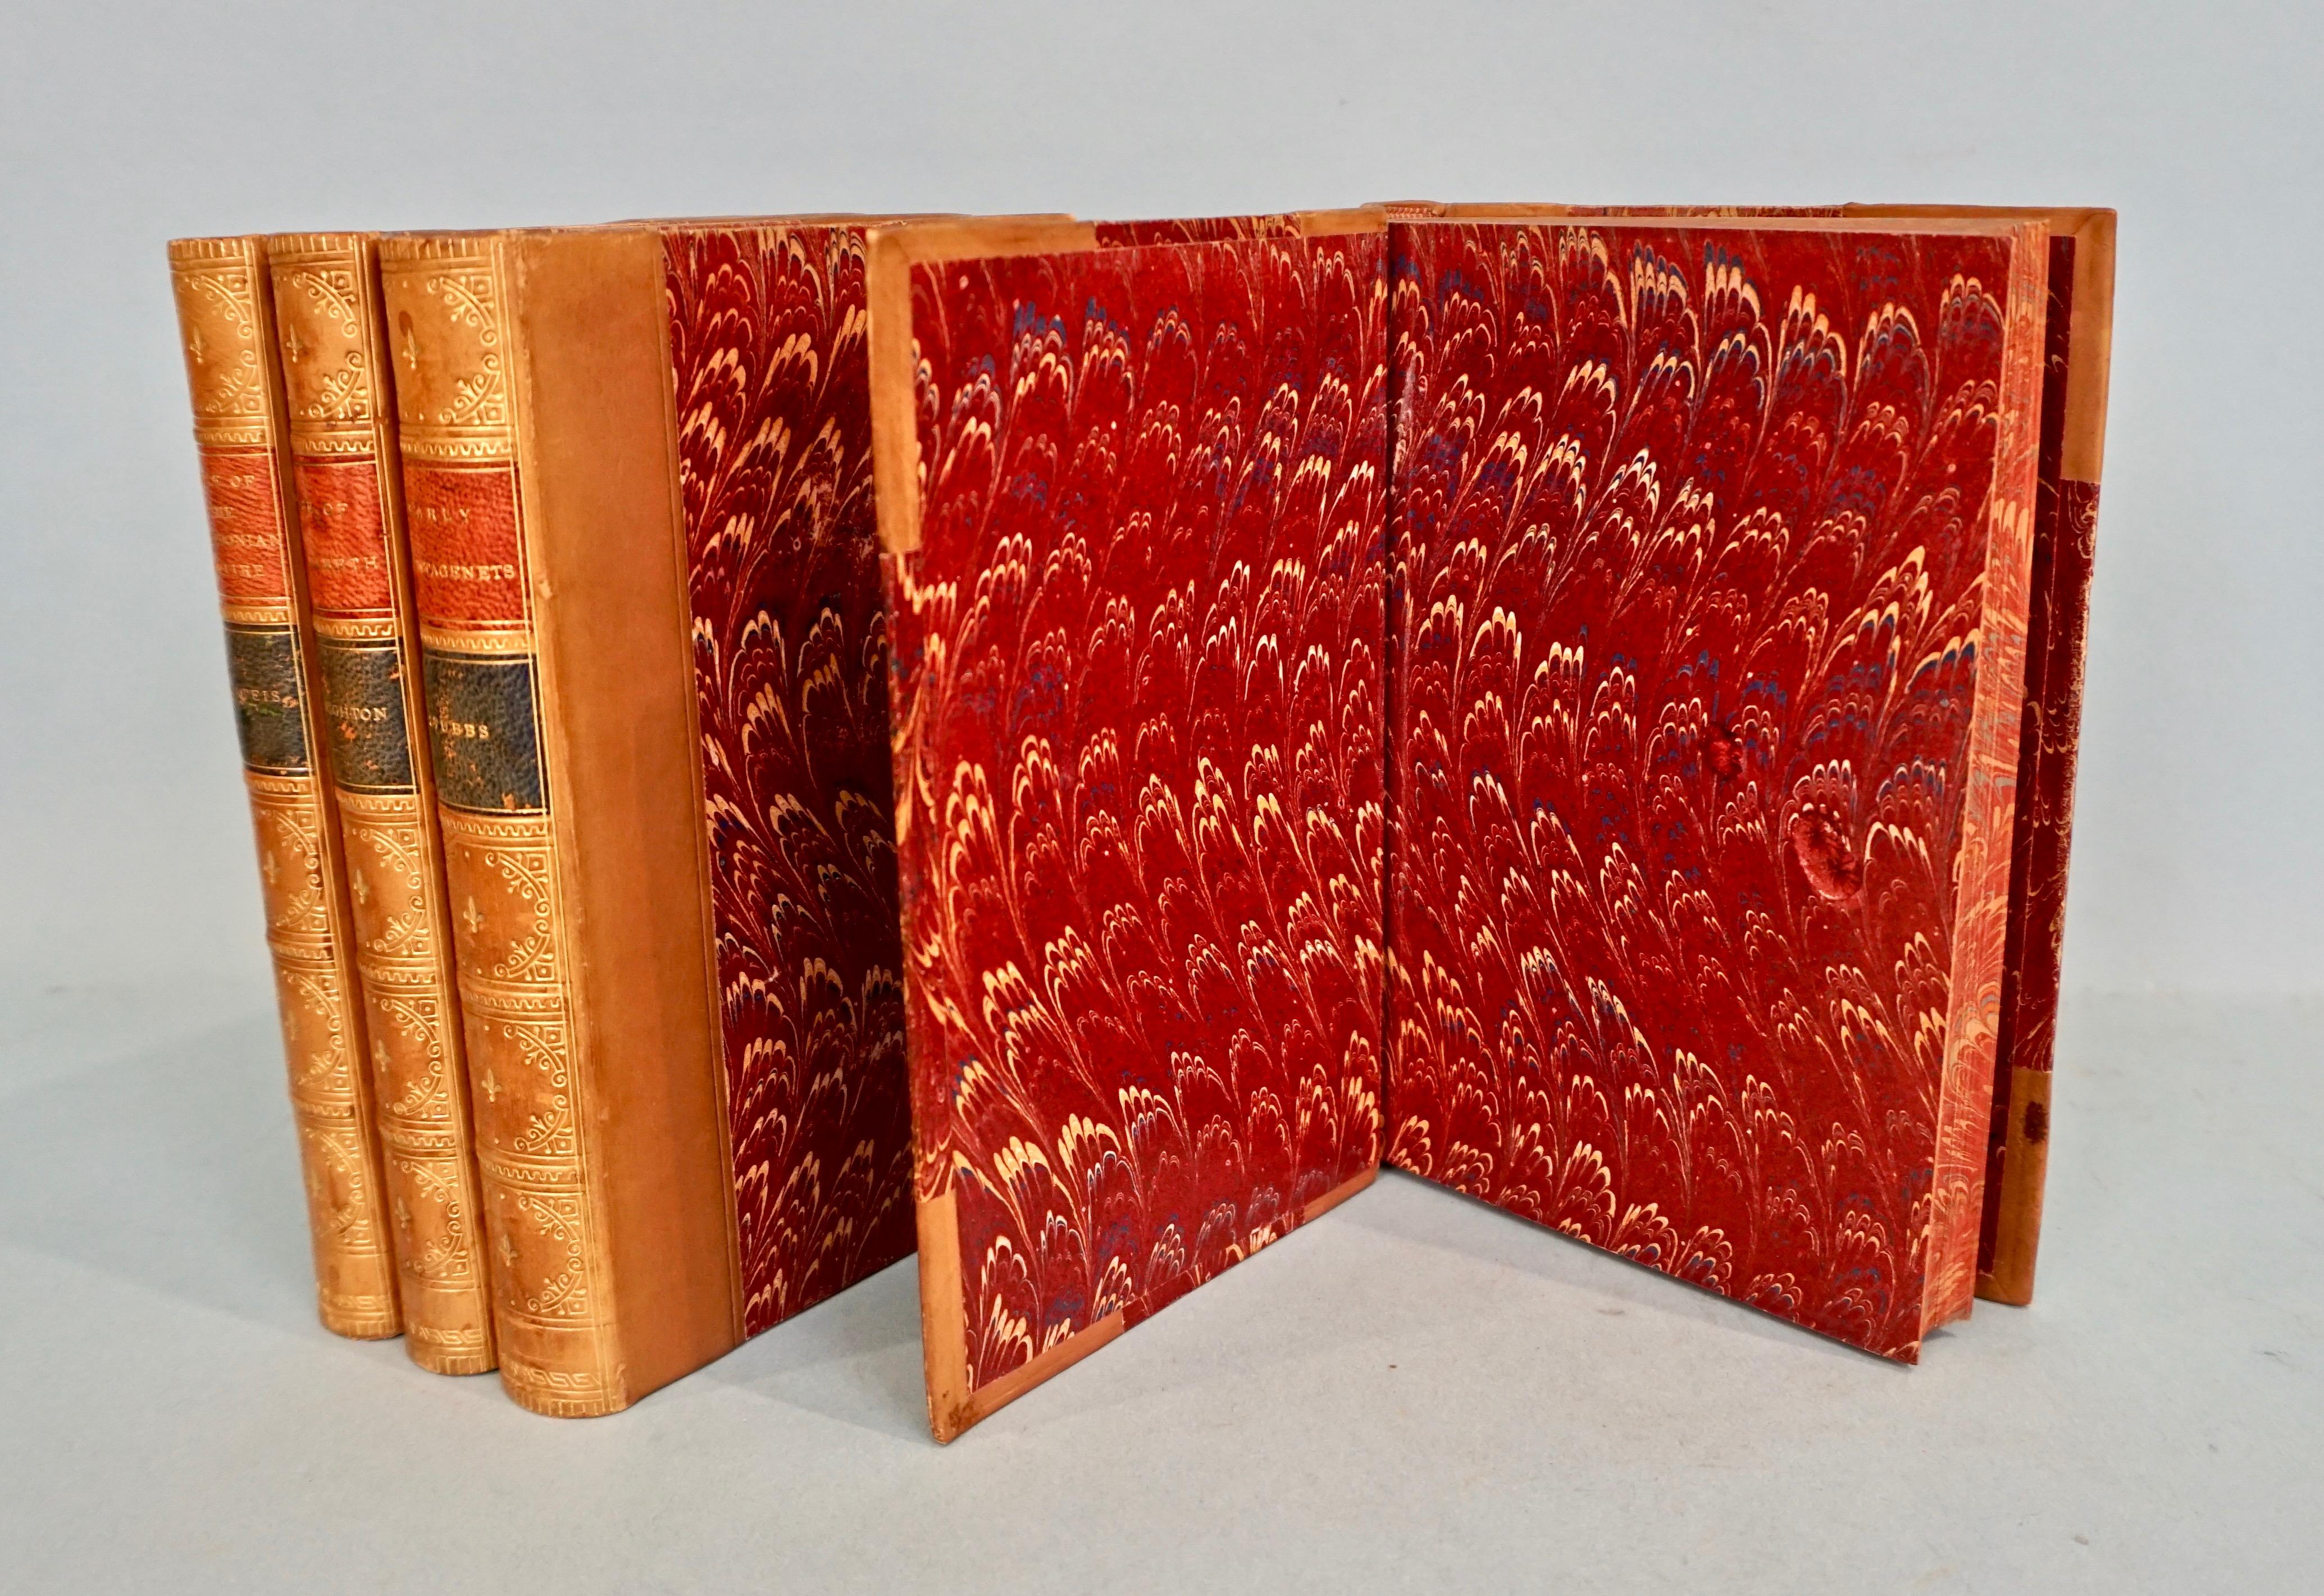 19th Century Epochs of Ancient History in 20 Volumes Bound in Tan Leather